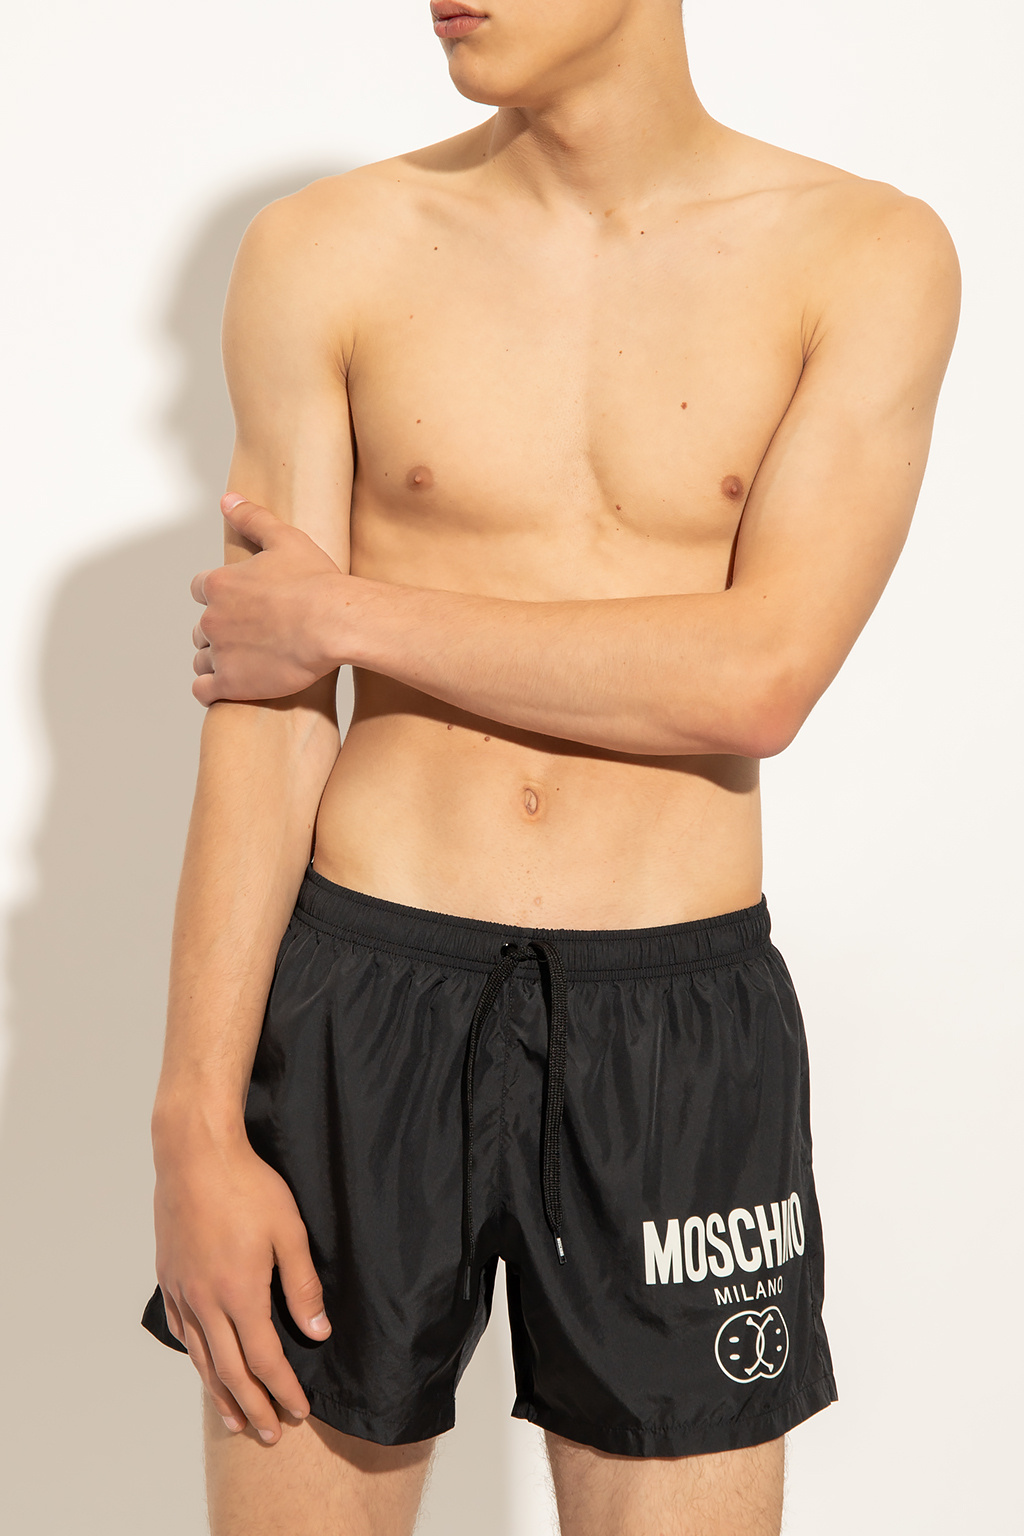 Moschino tapered mens pants®